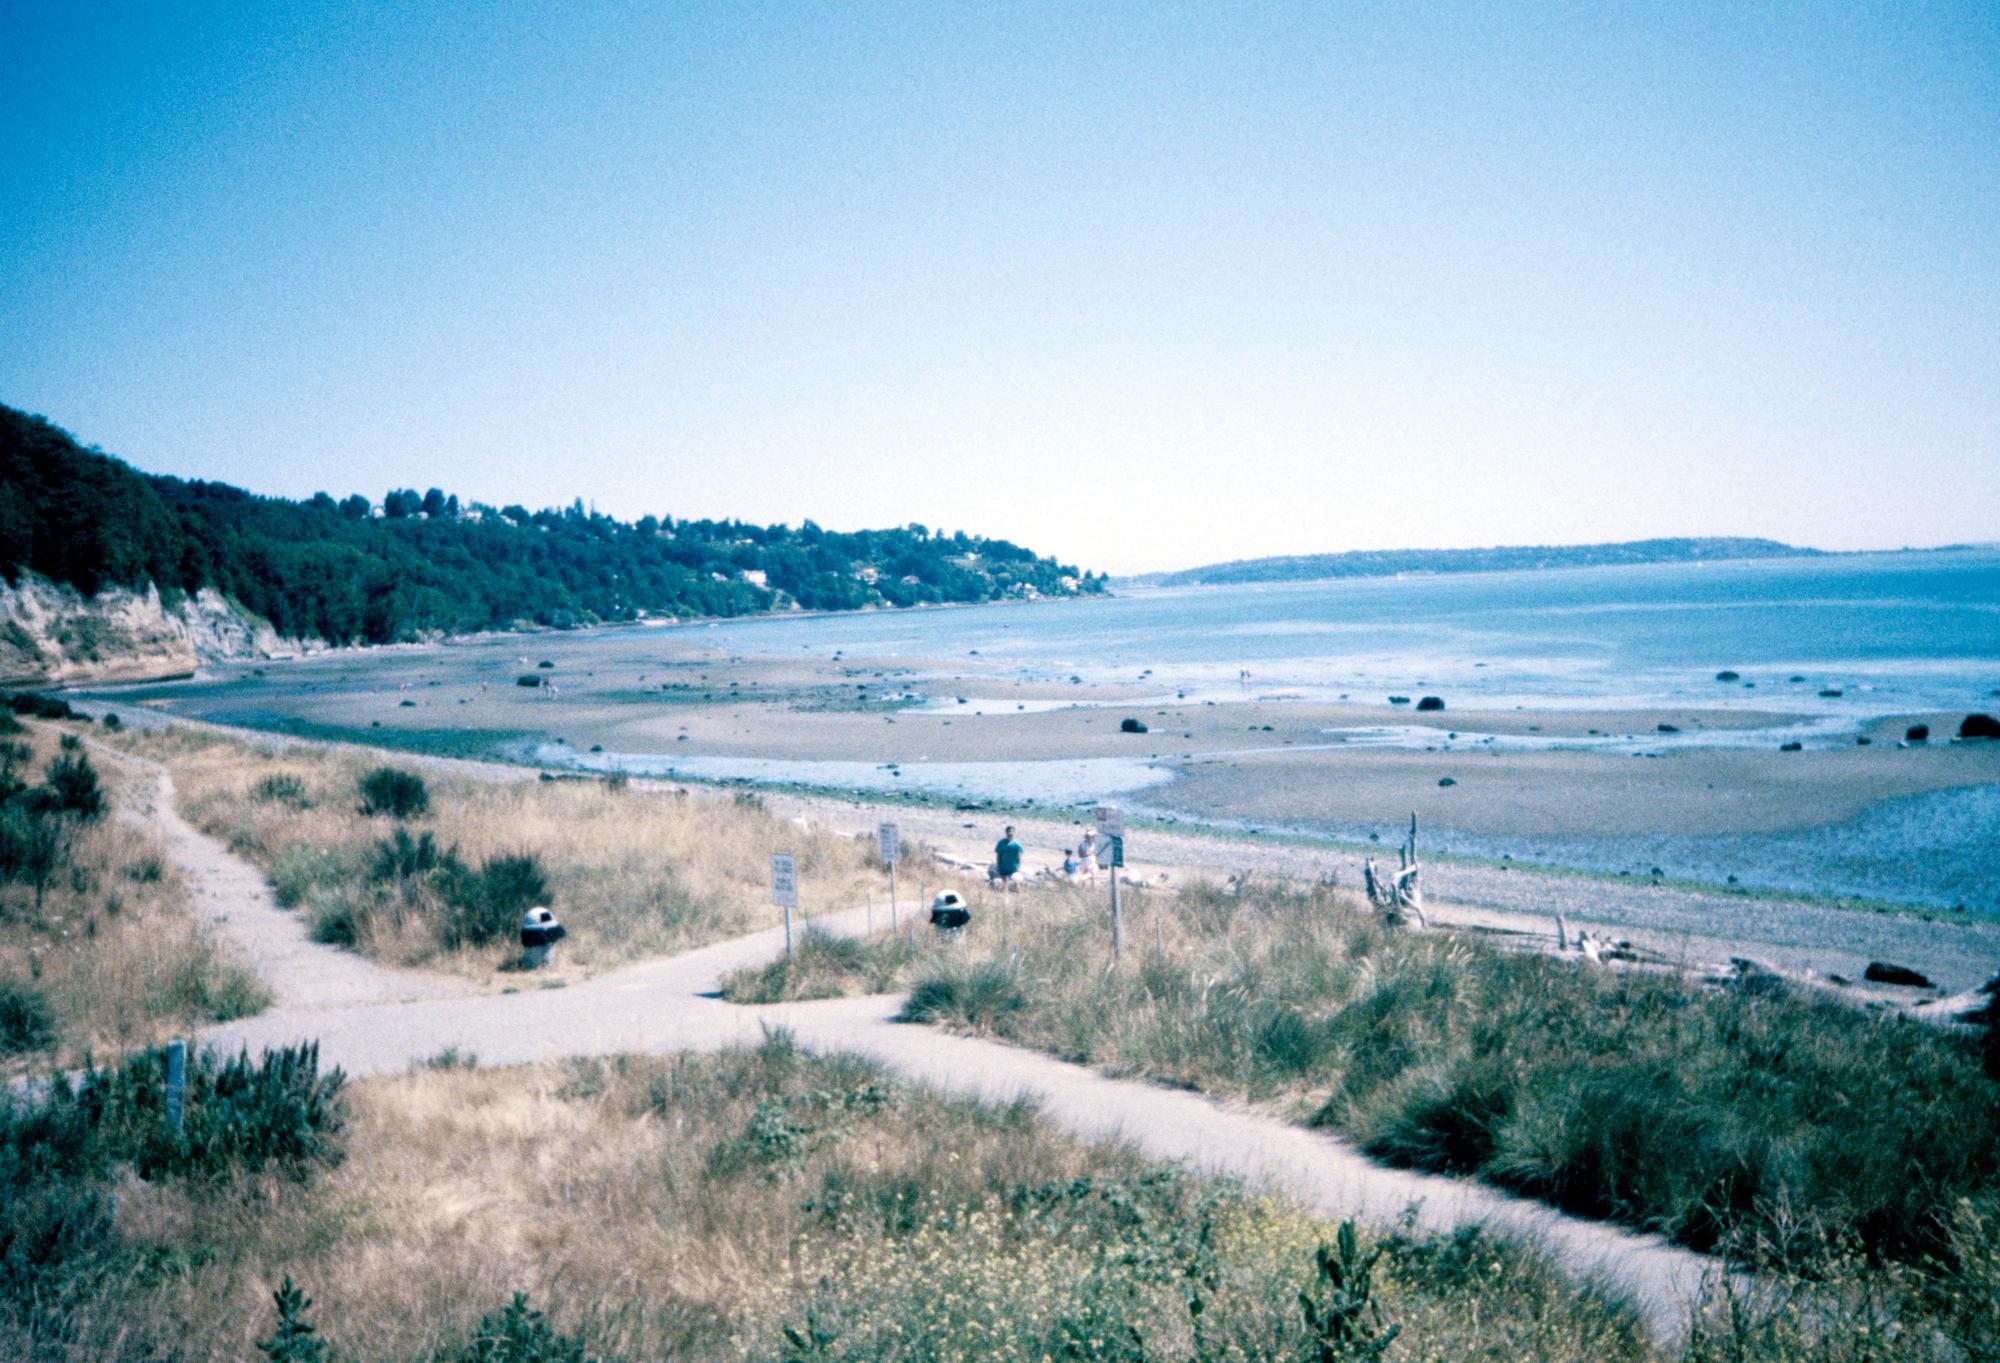 Seattle (1994) - Discovery Park Beach